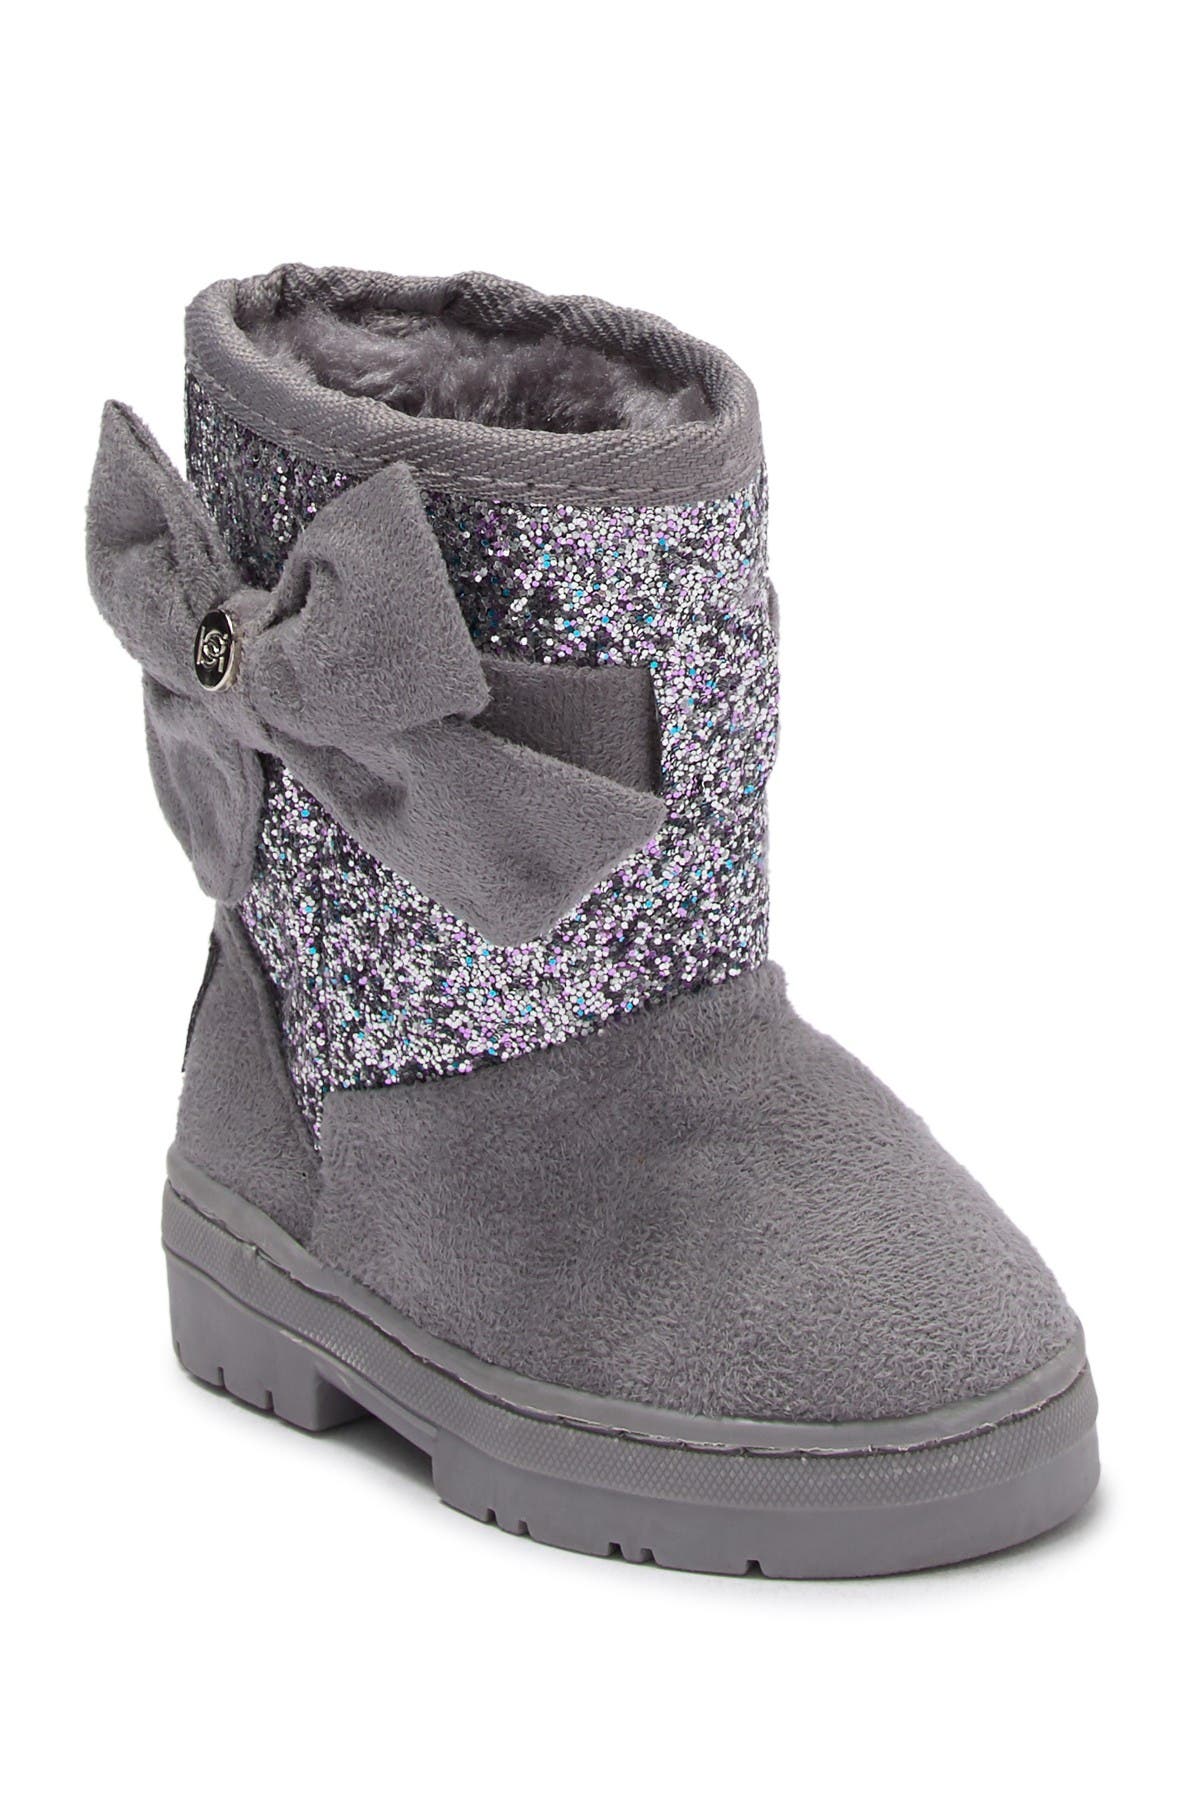 Glitter Bow Faux Fur Lined Winter Boot 